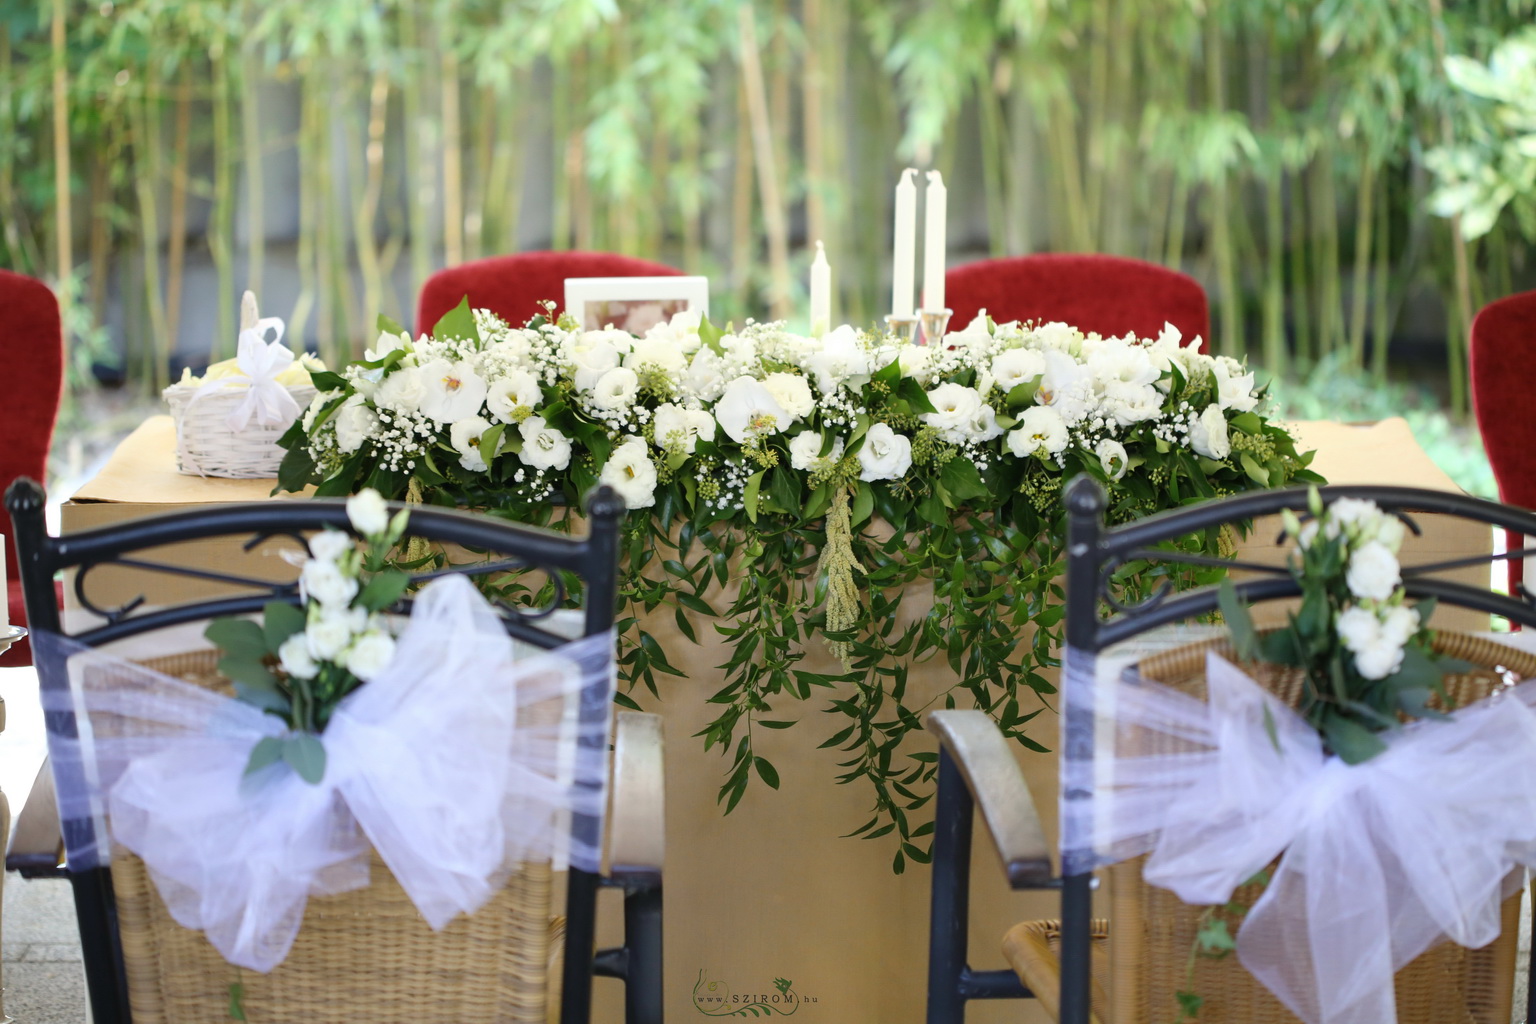 flower delivery Budapest - center table decoration, chair decoration with organza, flower, Gundel Budapest (lisianthus, white)